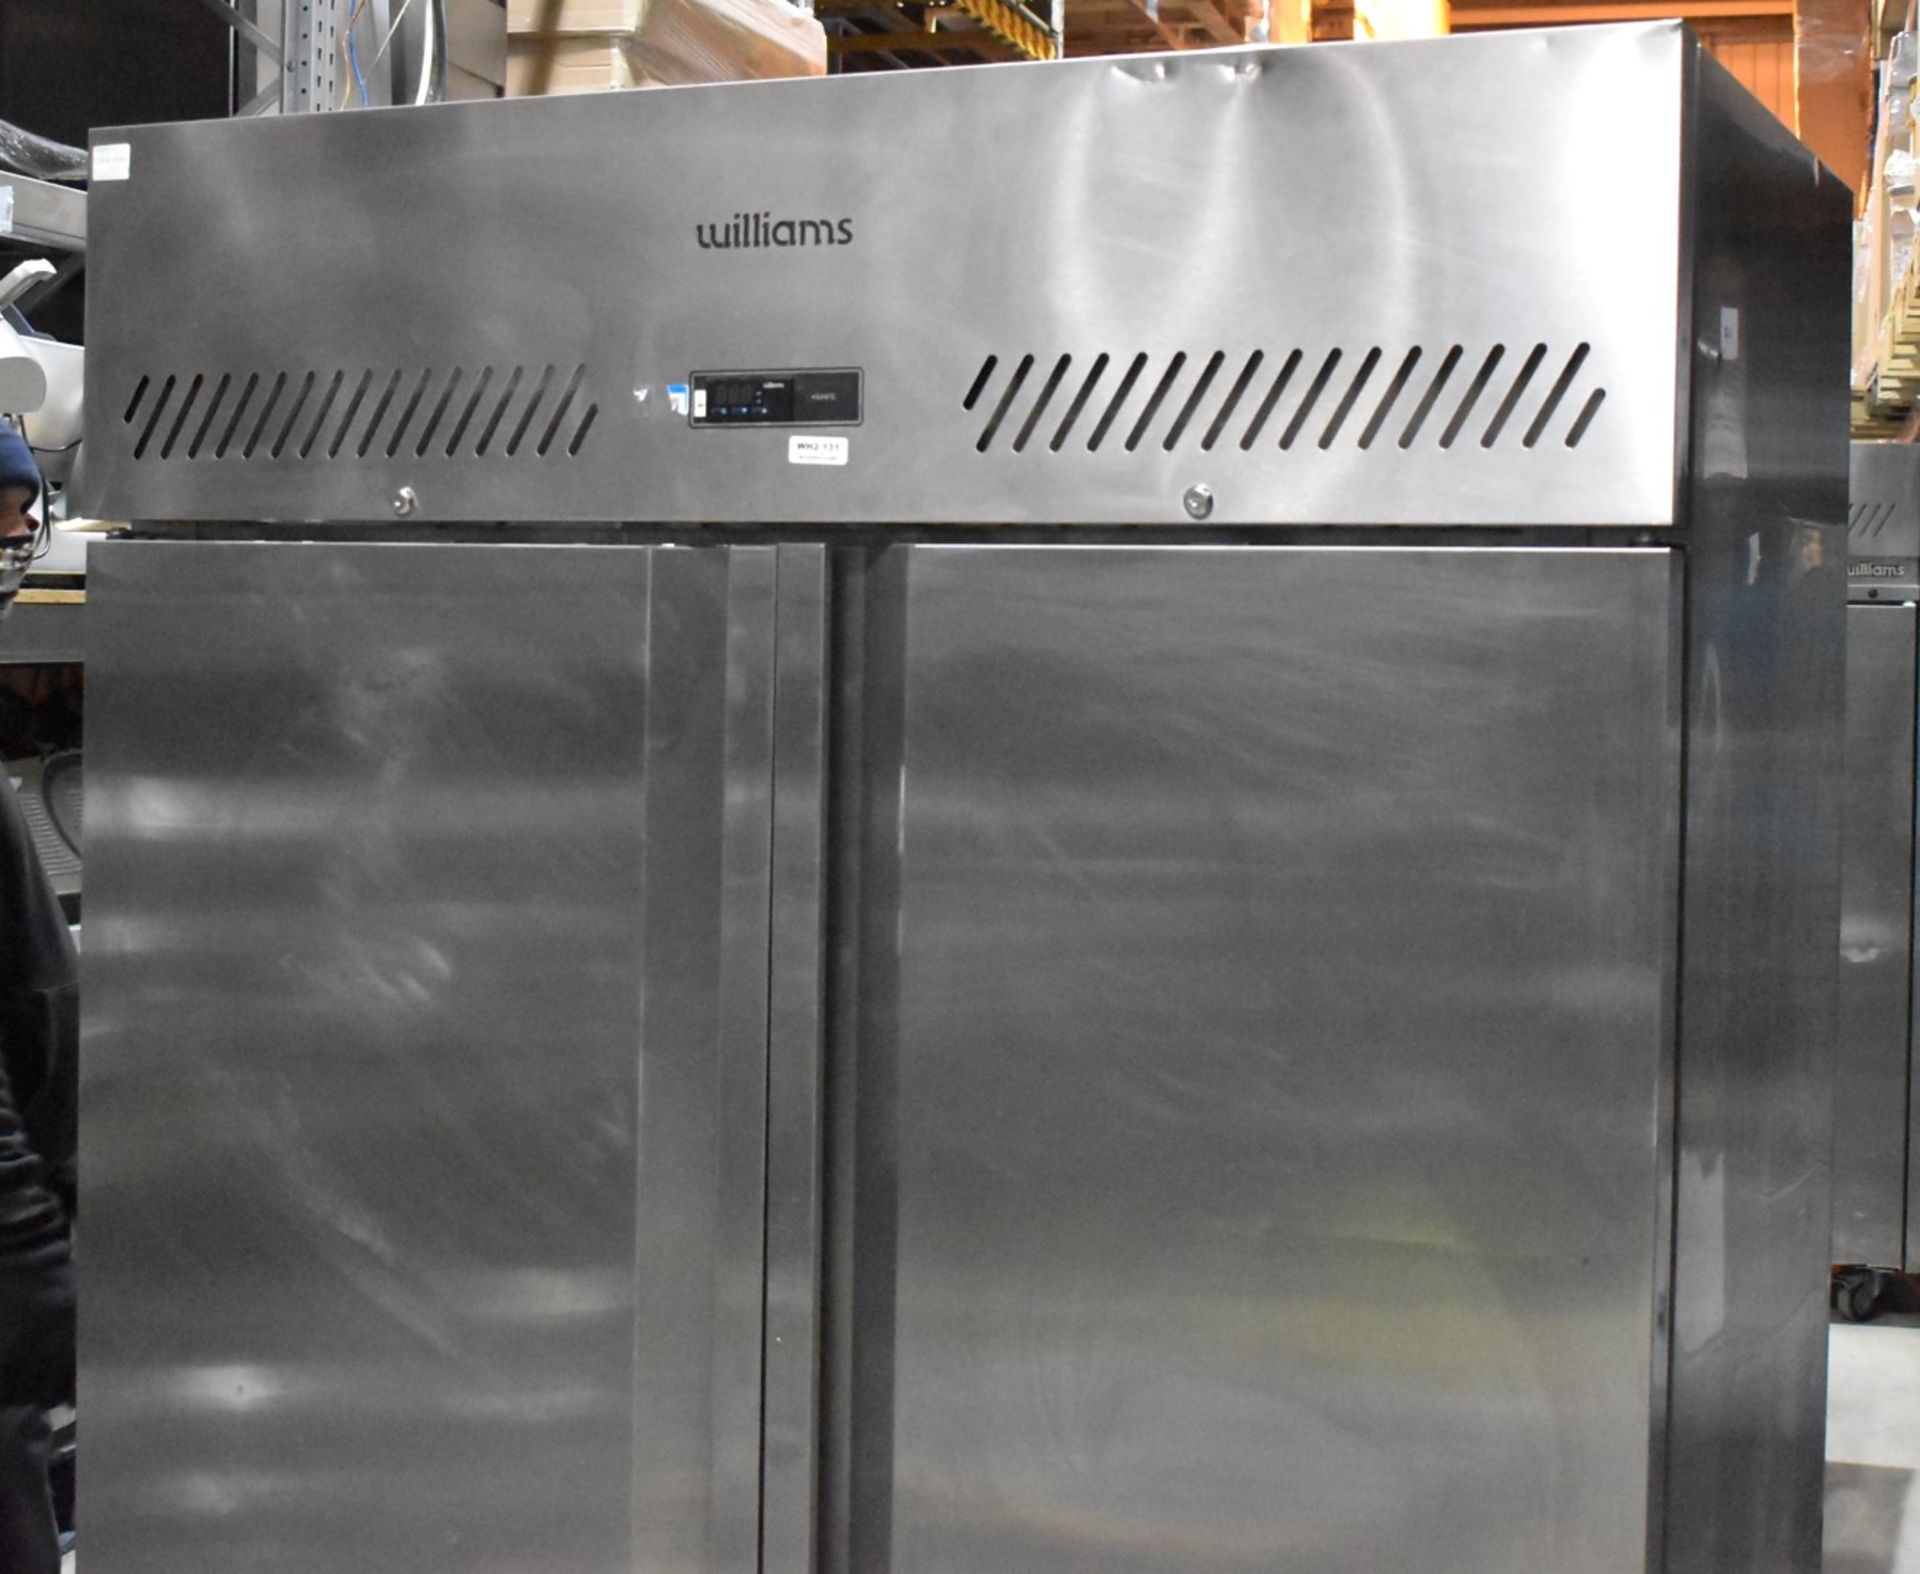 1 x Williams Upright Double Door Refrigerator With Stainless Steel Exterior - Model HS2SA - Recently - Image 17 of 20